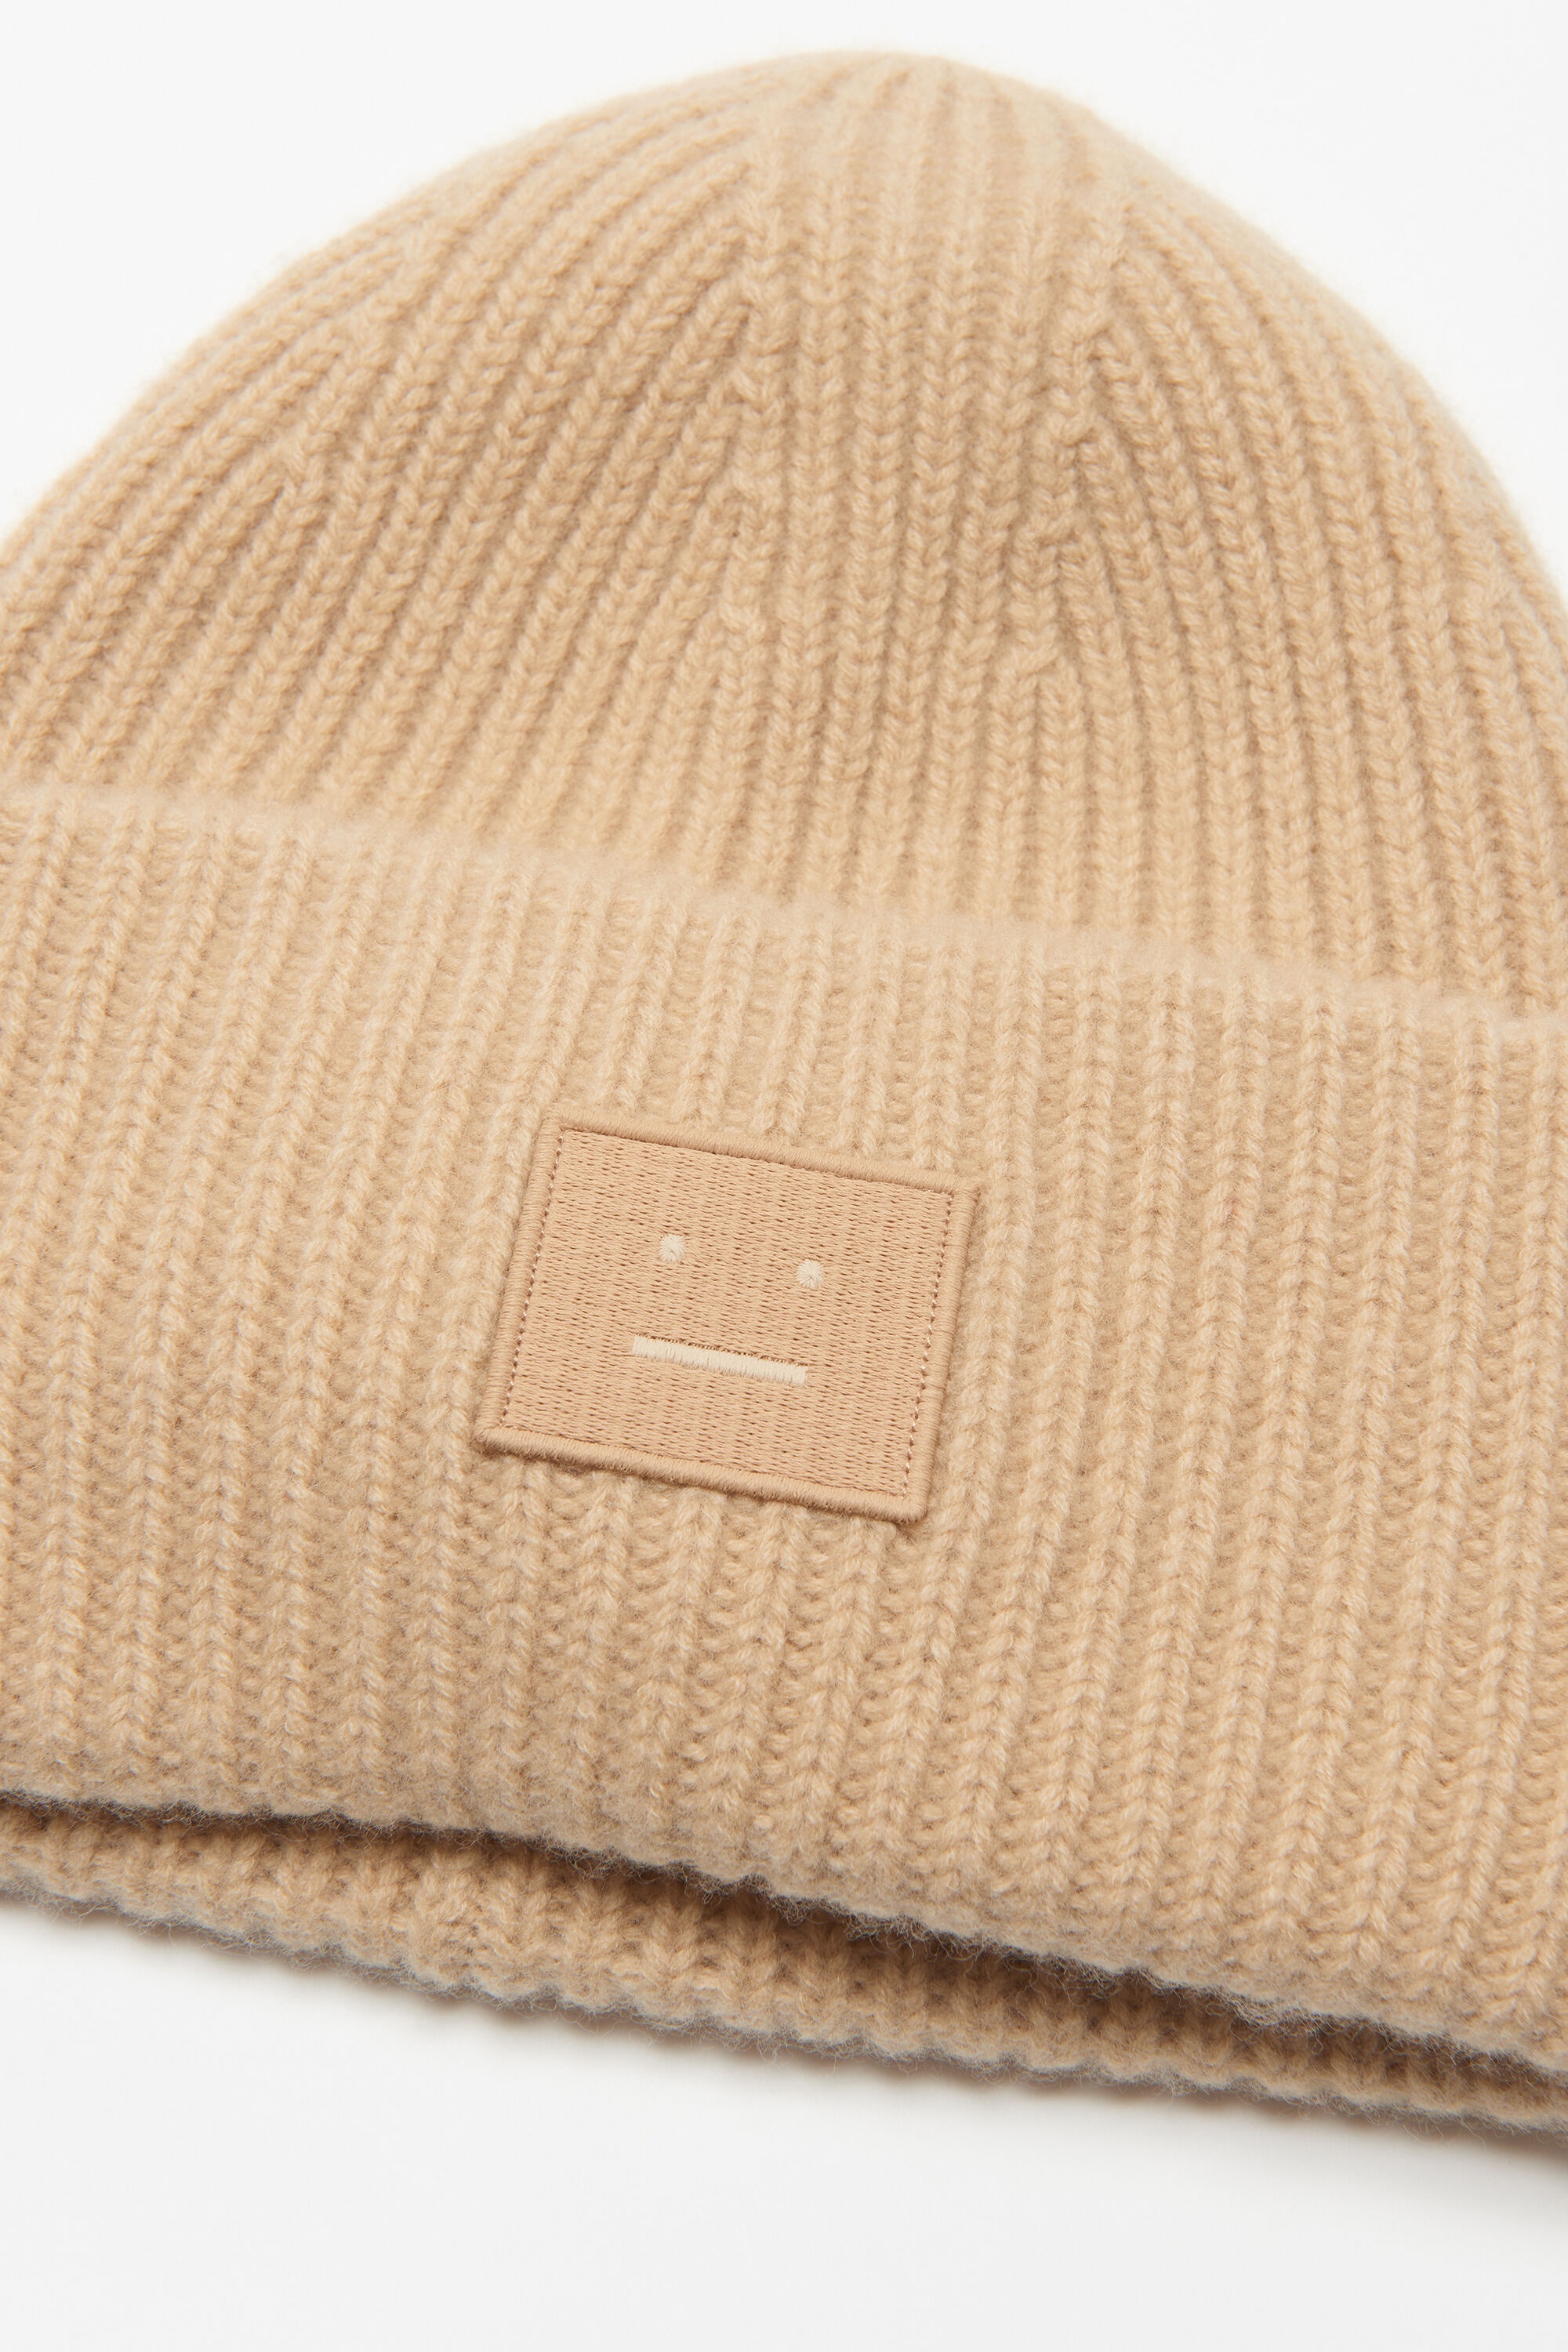 Large face logo beanie - Biscuit beige - 3